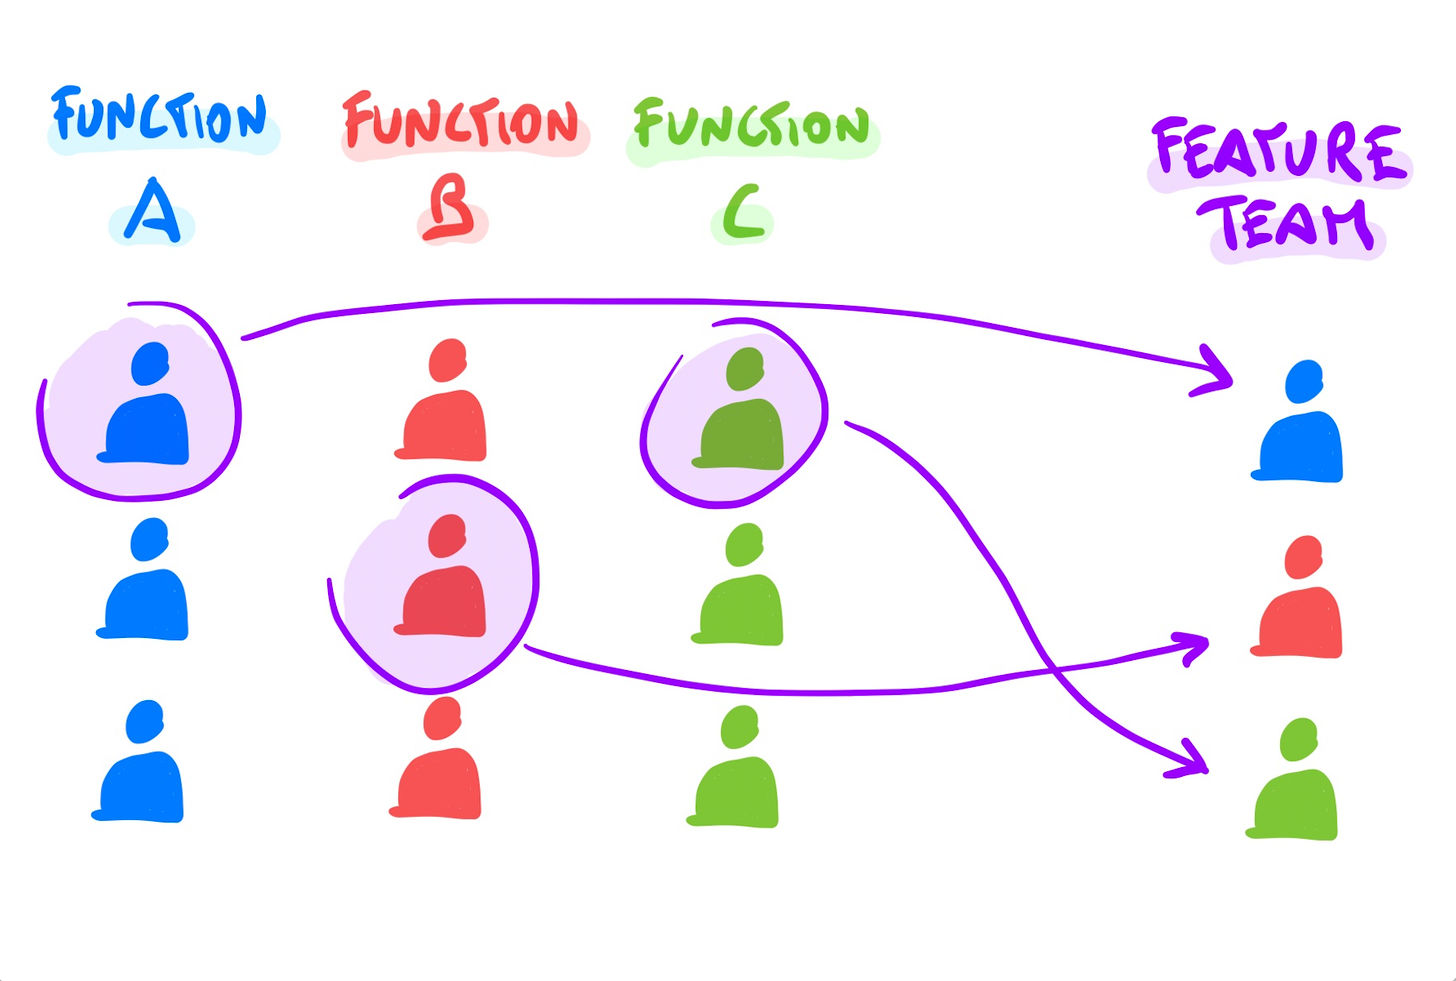 A Feature Team is a temporary aggregation of people from multiple functions, led by a PM